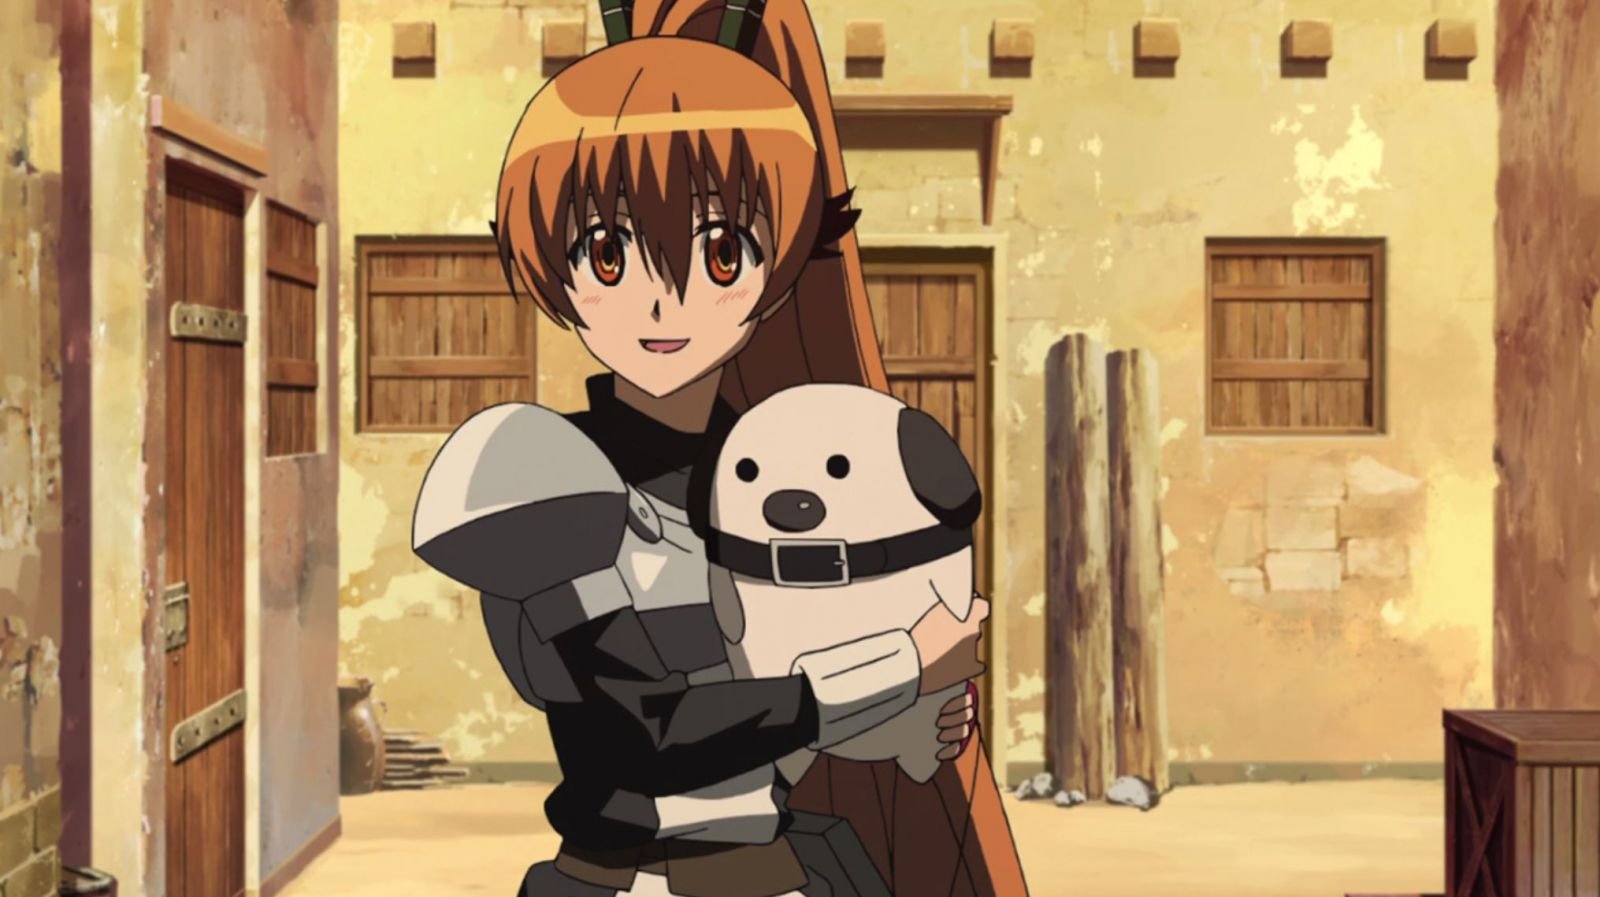 12 Most Popular Characters in the Anime Akame Ga Kill! Do you have a  favorite?